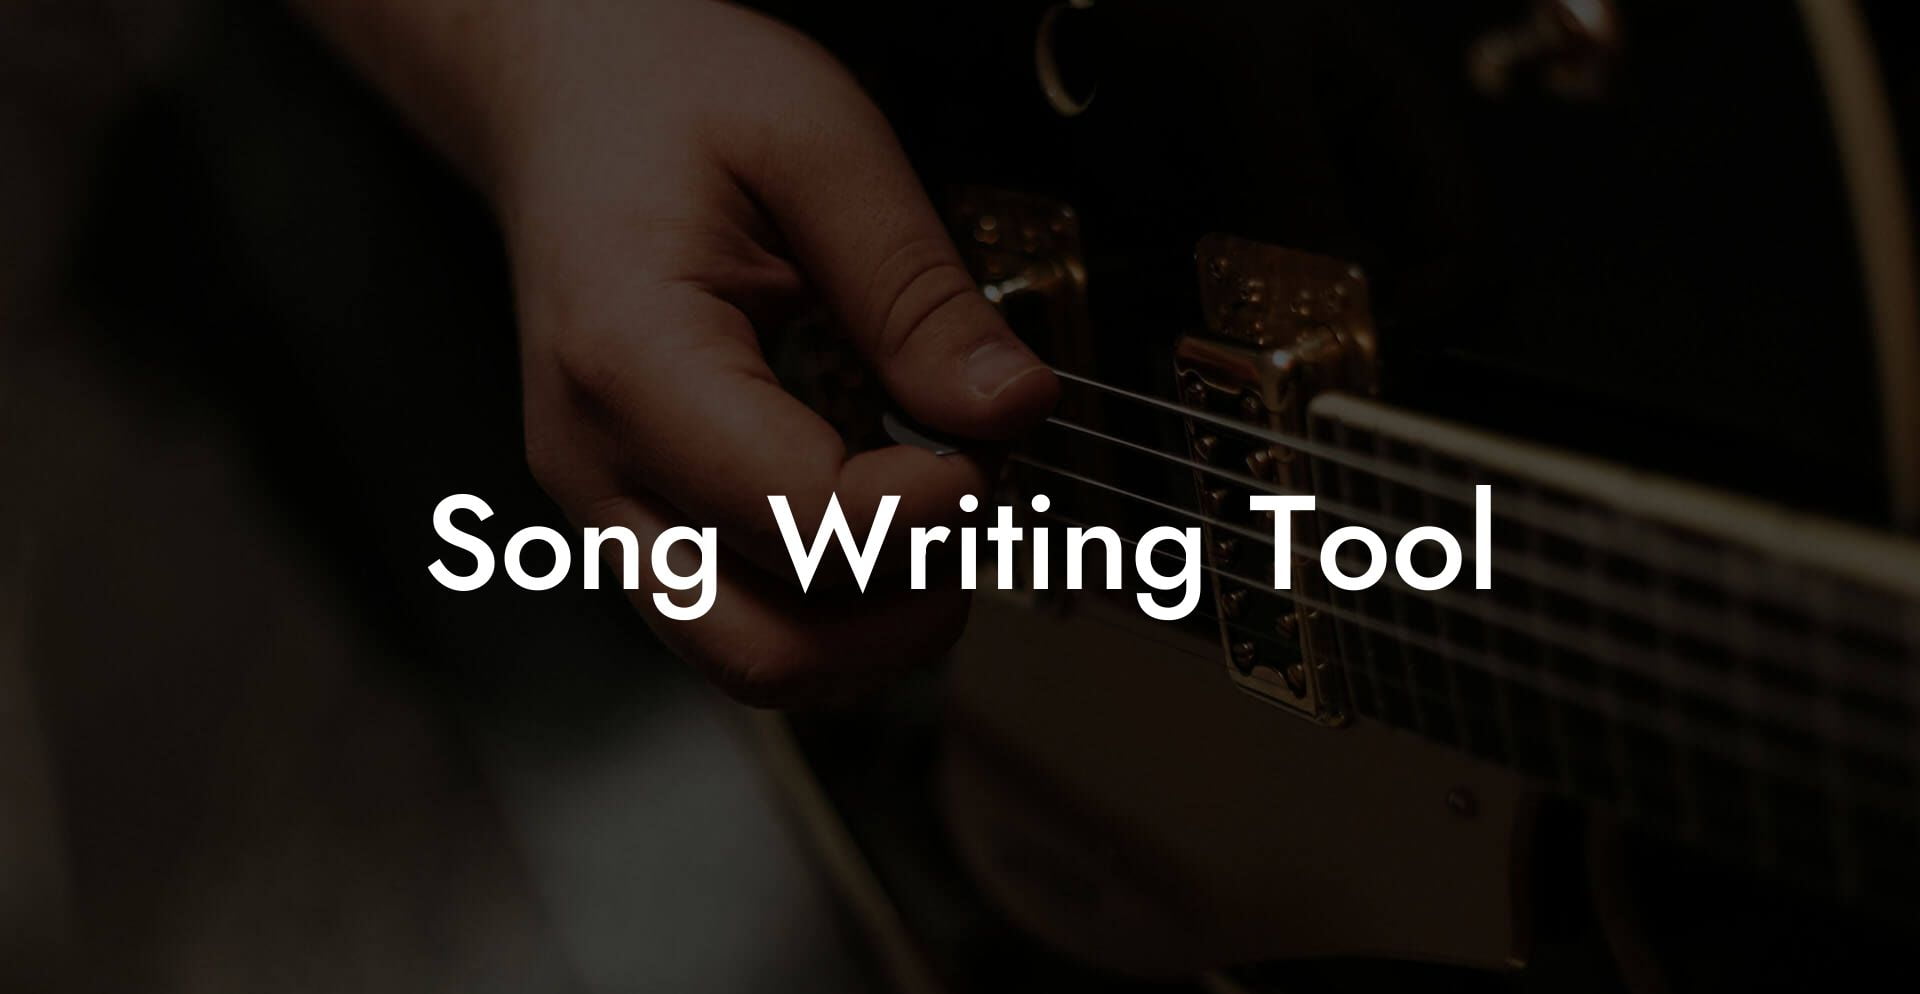 song writing tool lyric assistant